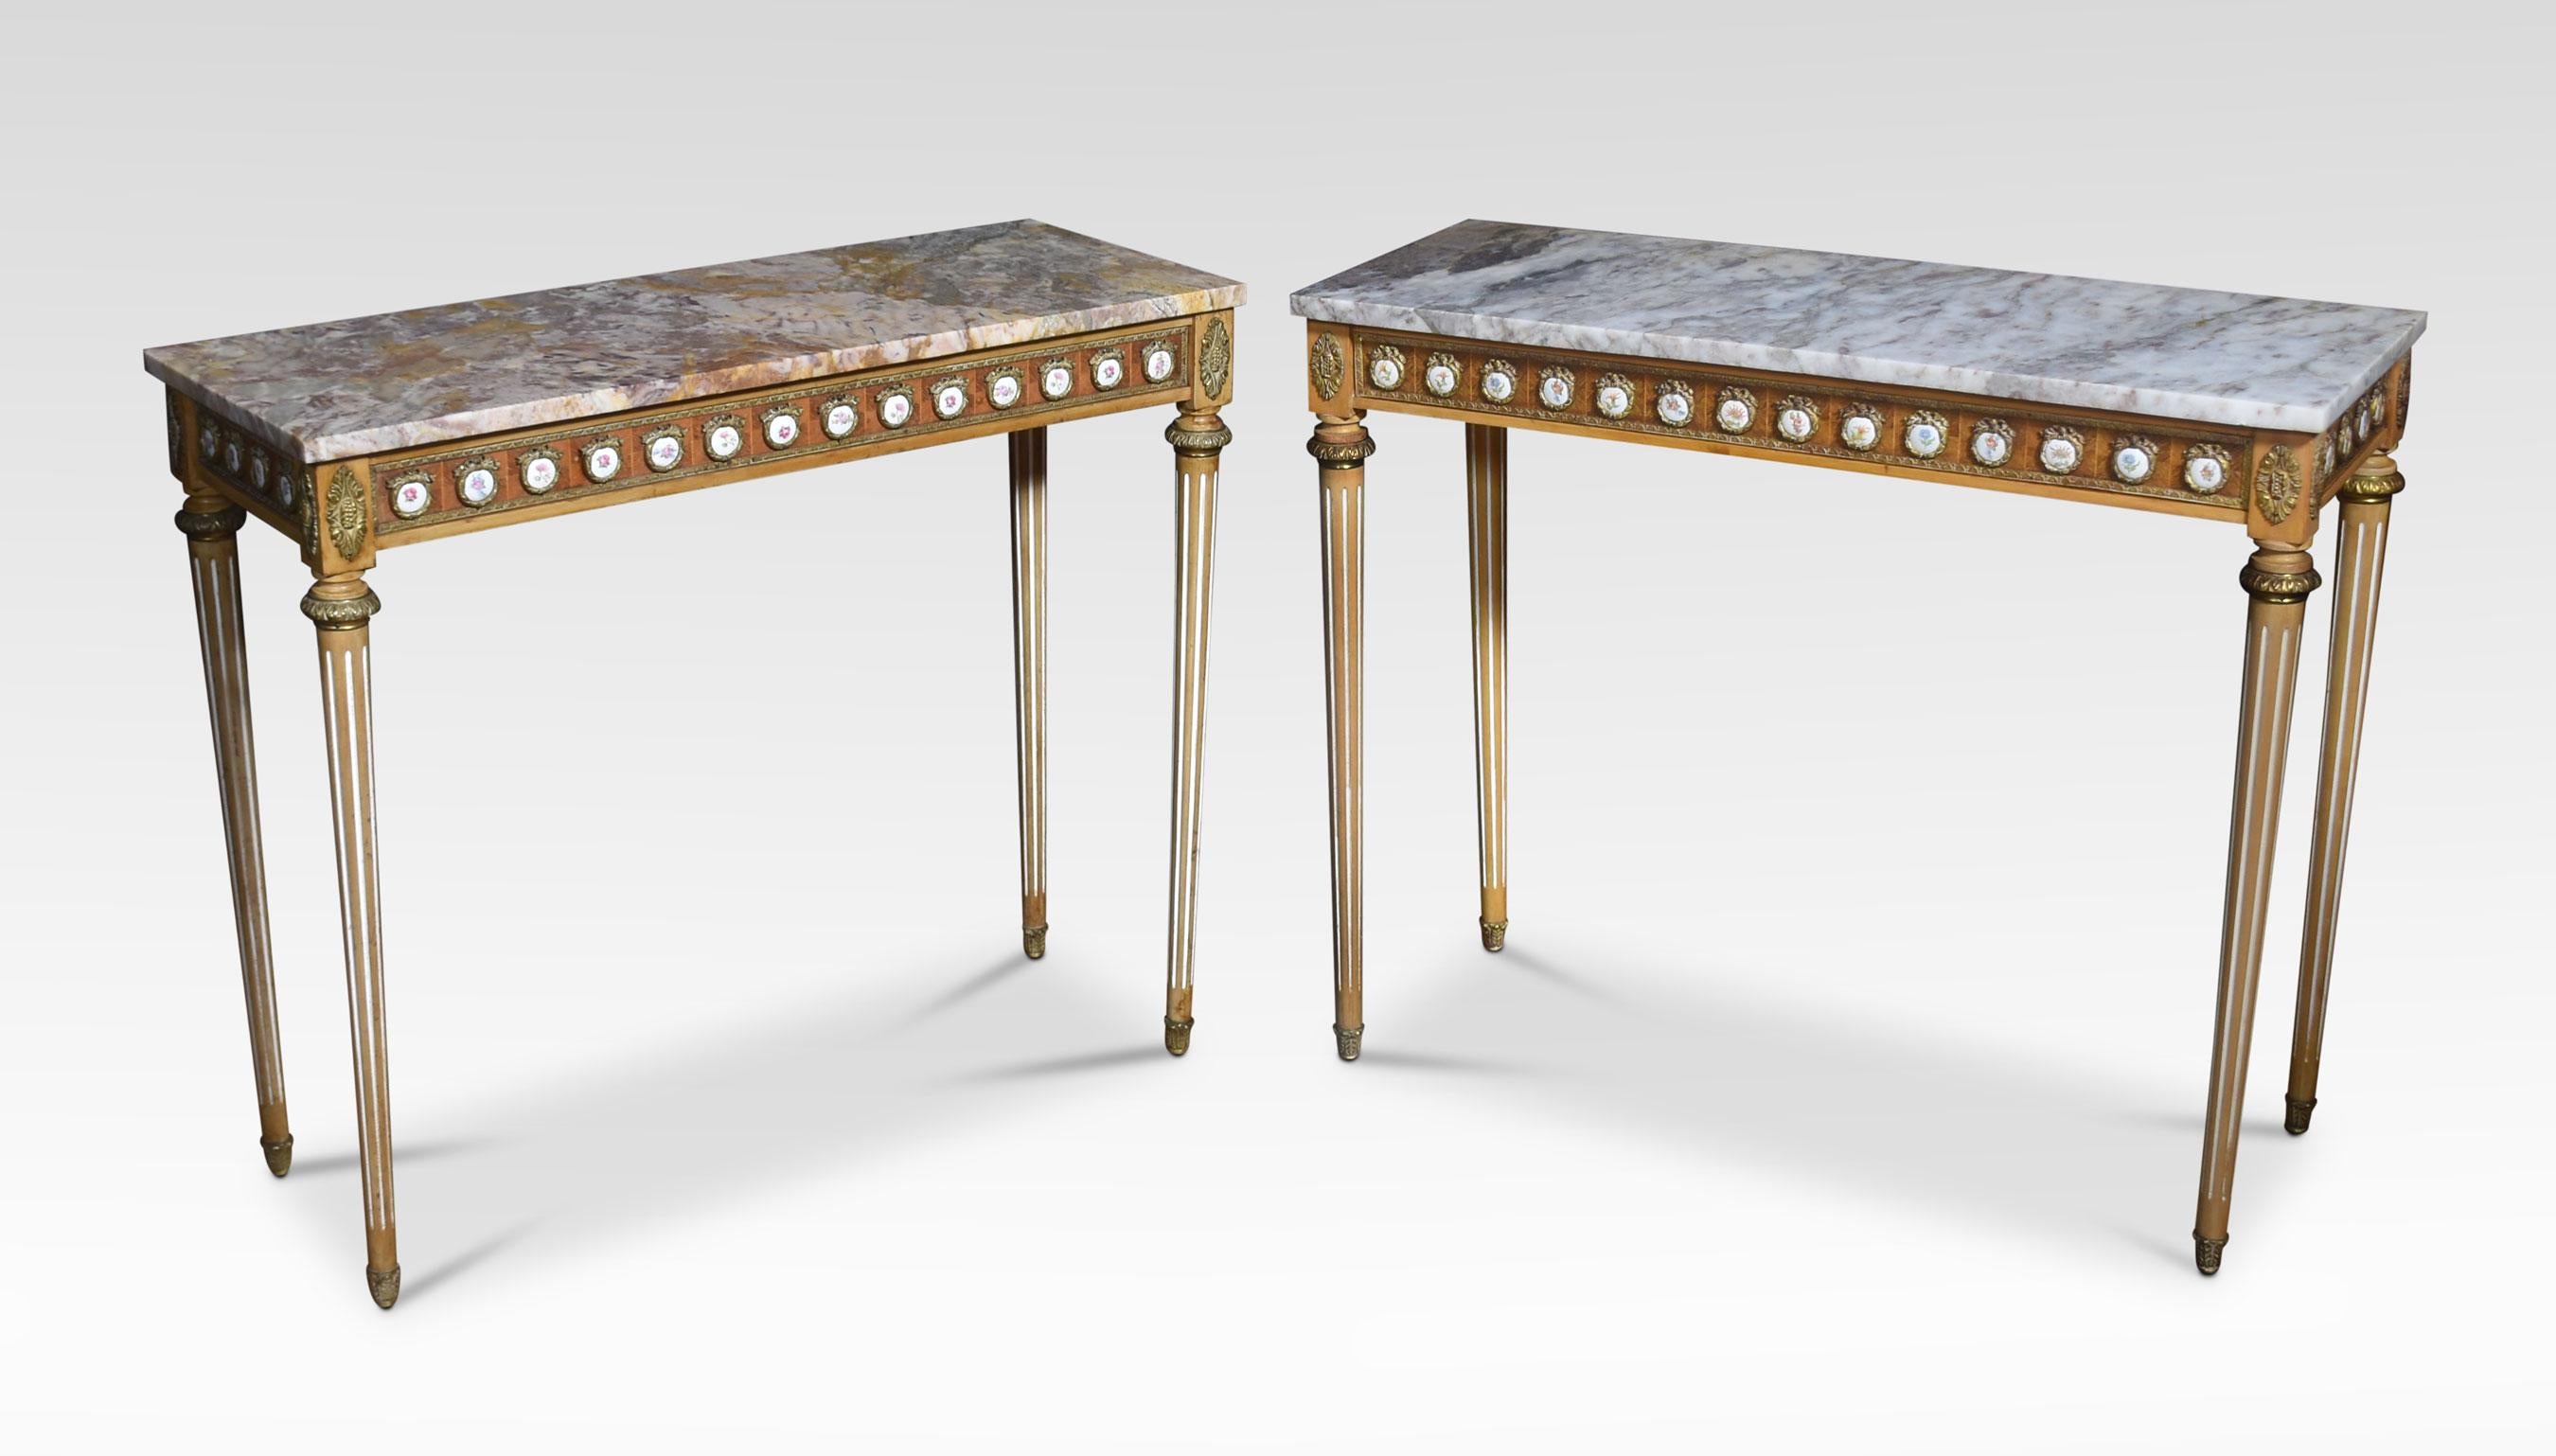 Pair of Louis XVI revival console tables by H & L Epstein